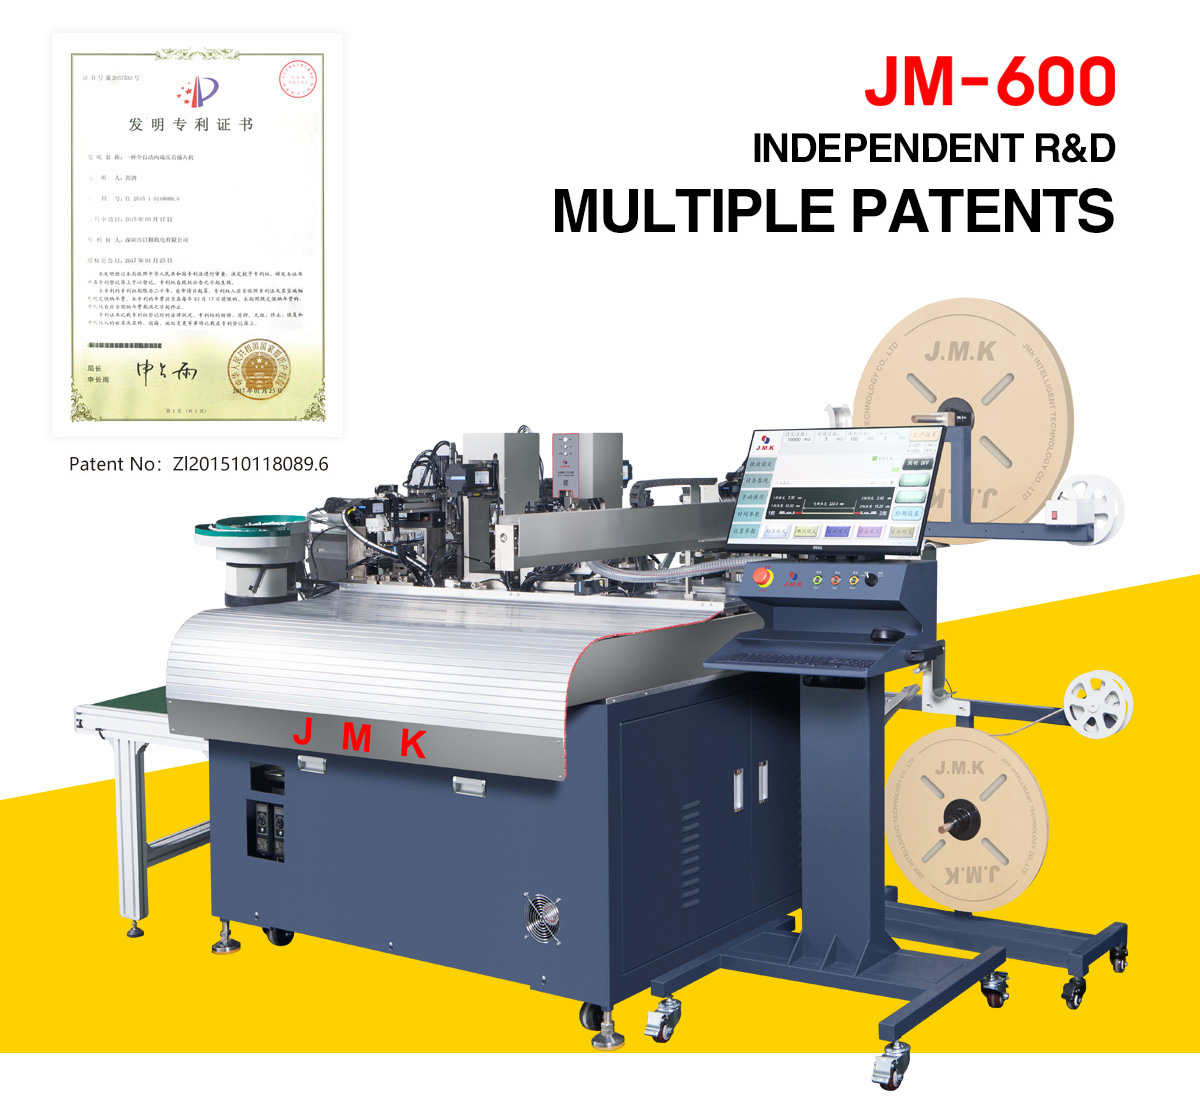 Fully understanding of automatic harness insertion machine